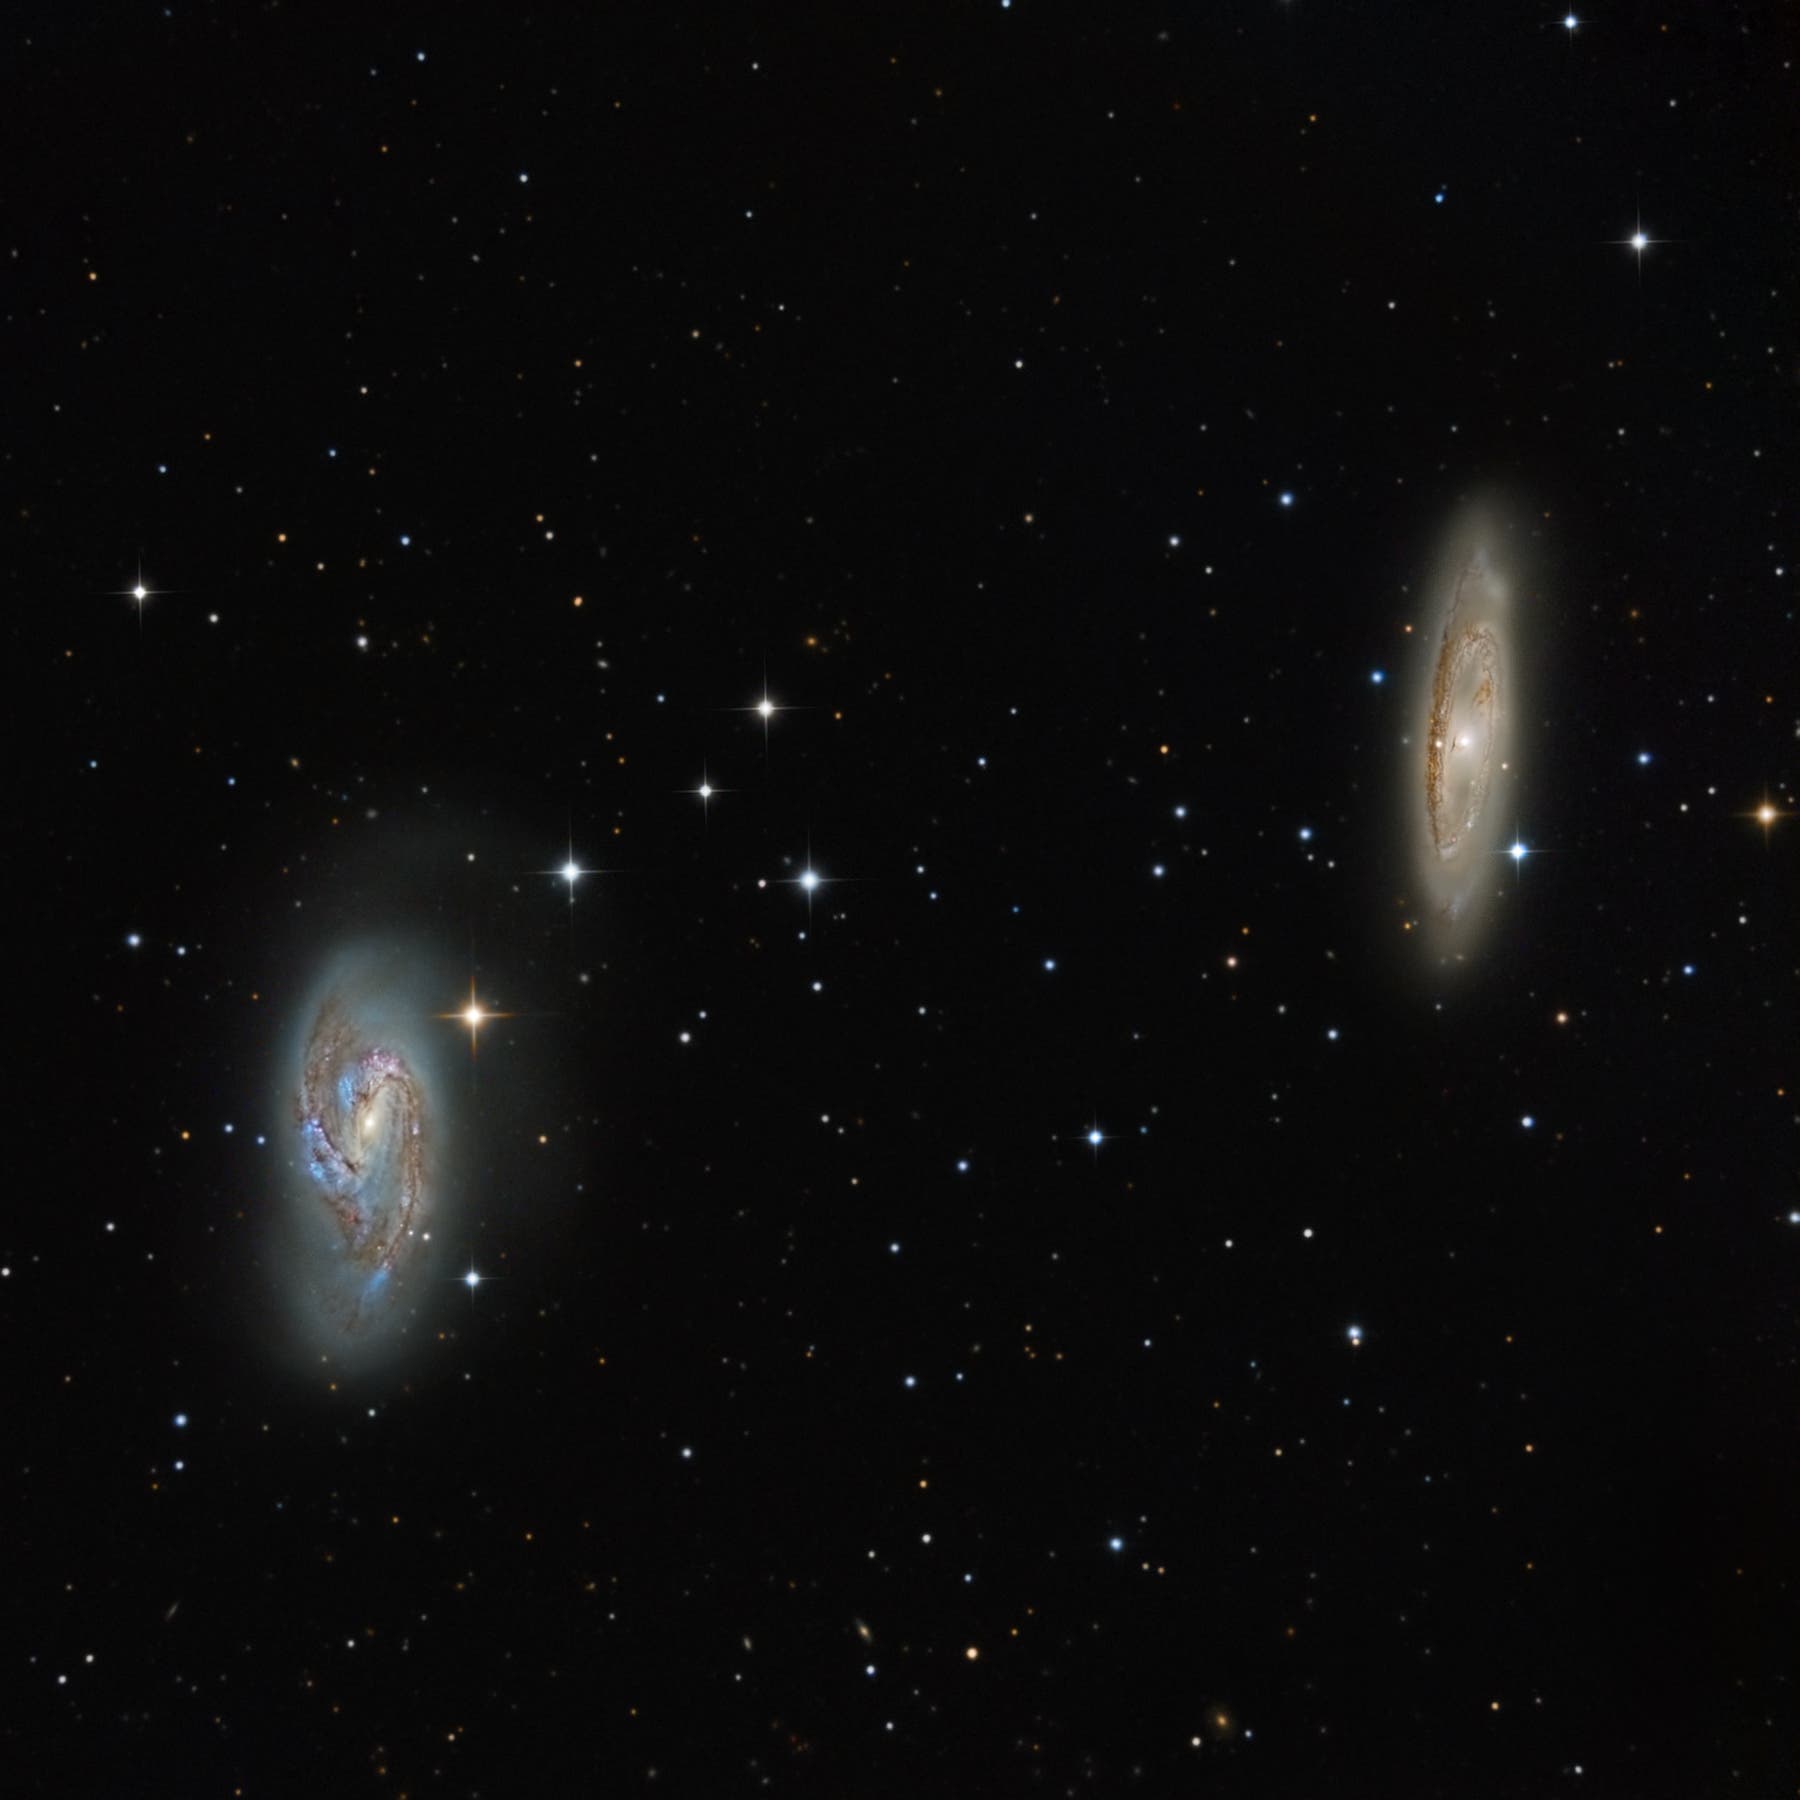 M65 (NGC 3623), Spiral Galaxy type Sa and M66 (NGC 3627), Spiral Galaxy type Sb, in Leo